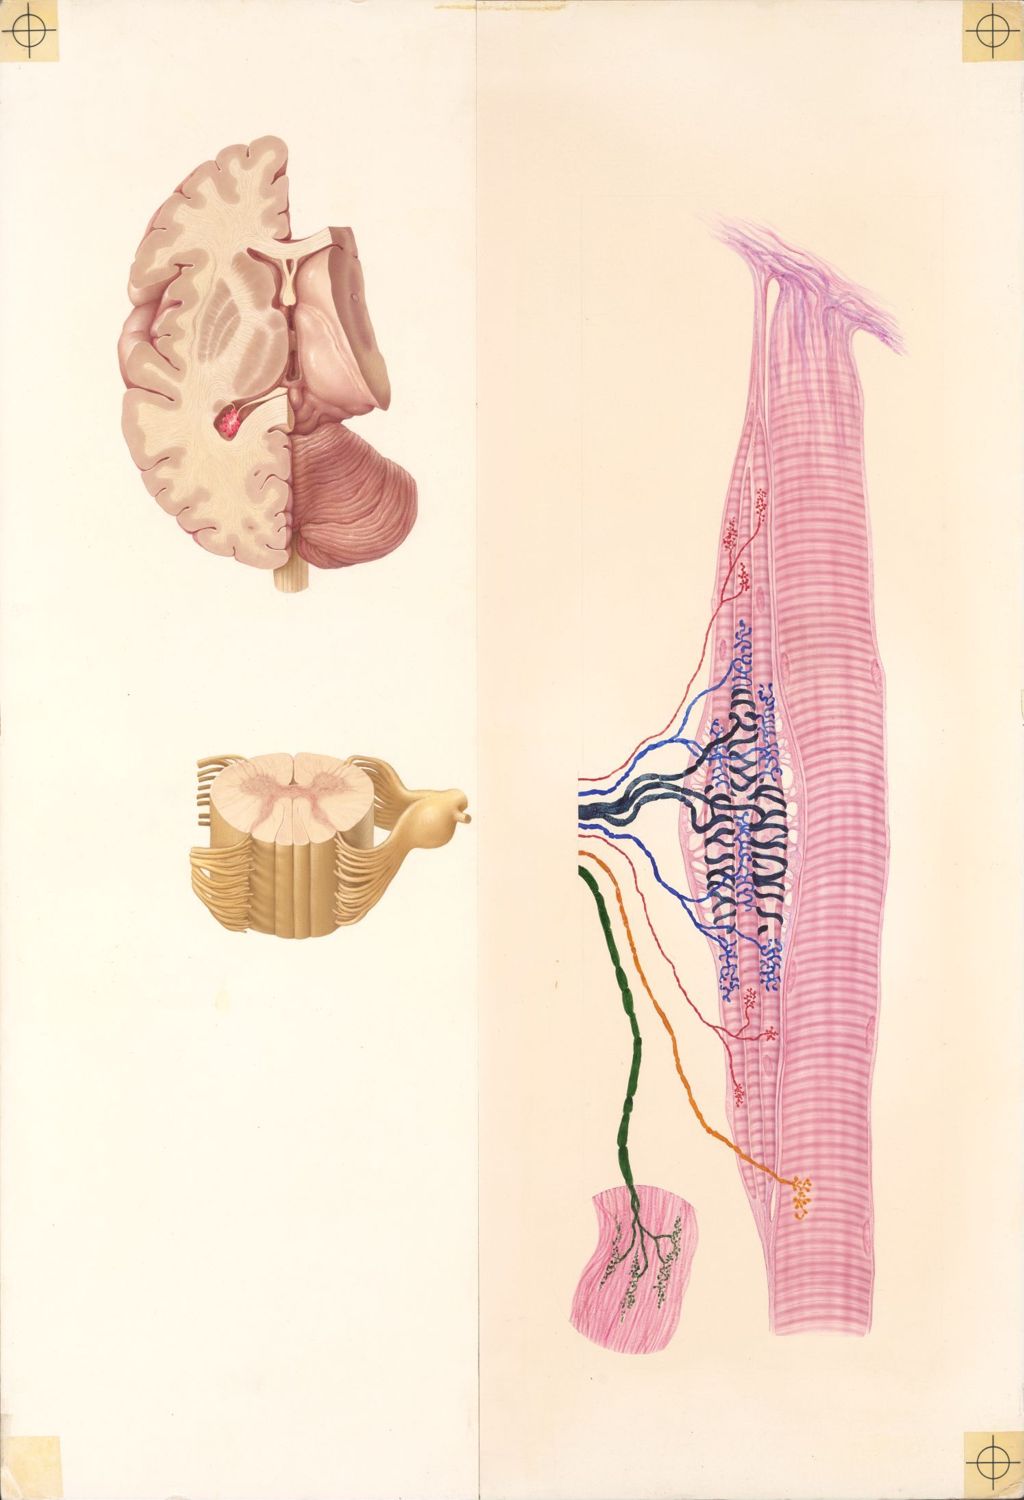 Doctor-Patient Explanatory Atlas of Anatomy, Plate II, Circuitry of the Stretch Reflex